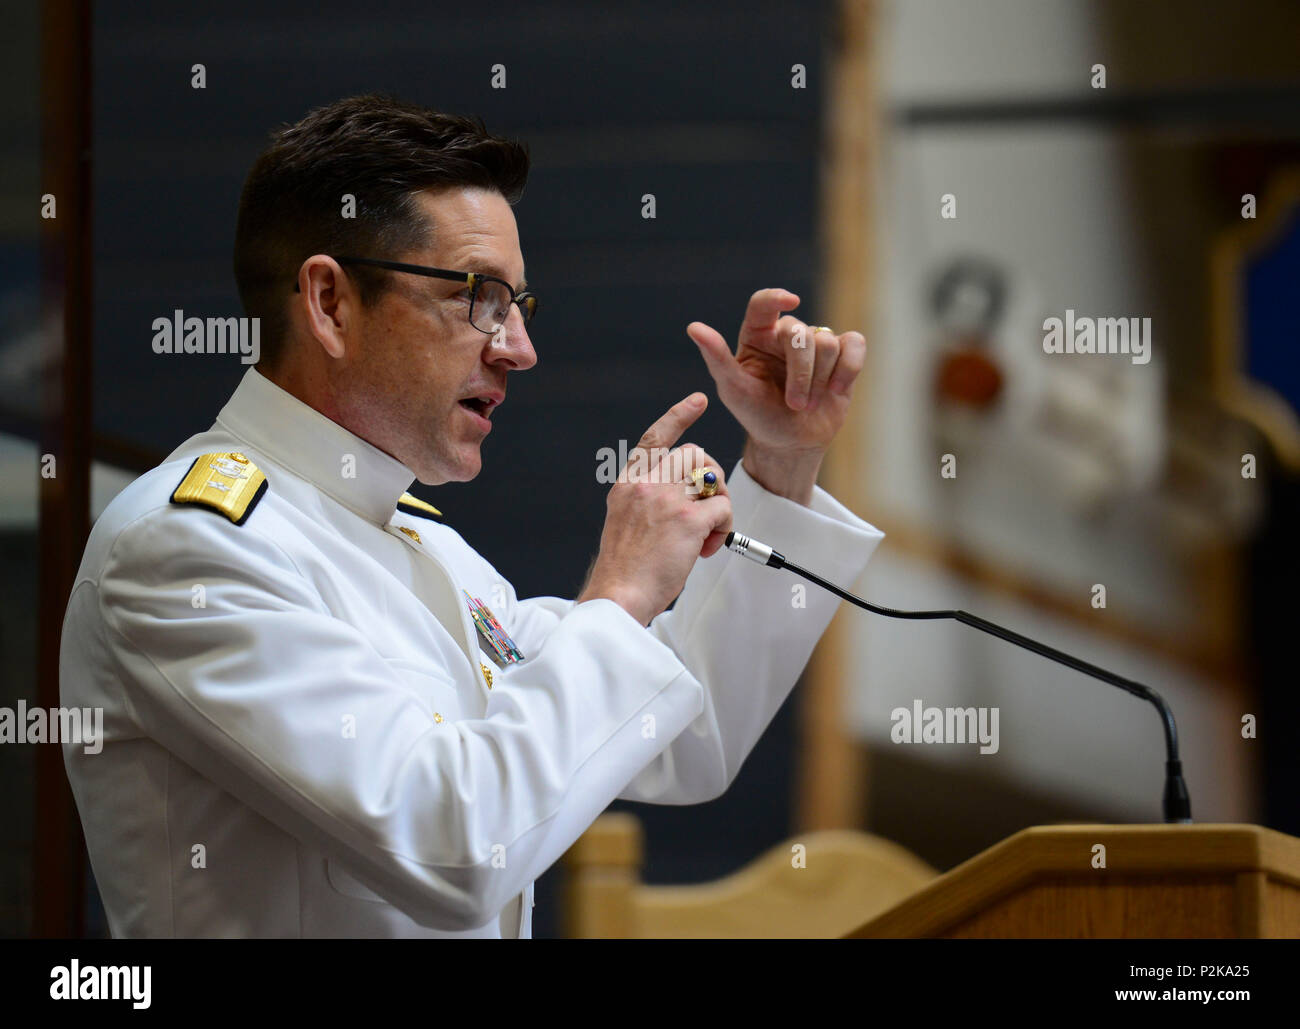 161001-N-TZ605-183 WASHINGTON (Oct. 1, 2016) Rear Adm. Robert T. Durand, vice-chief of information (CHINFO), delivers remarks during his promotion ceremony to rear admiral at the U.S. Navy Museum in Washington, Oct. 1, 2016. Vice-CHINFO heads the public affairs community for the U.S.Navy Reserve. (U.S. Navy photo by Petty Officer 1st Class Daniel Garas) Stock Photo